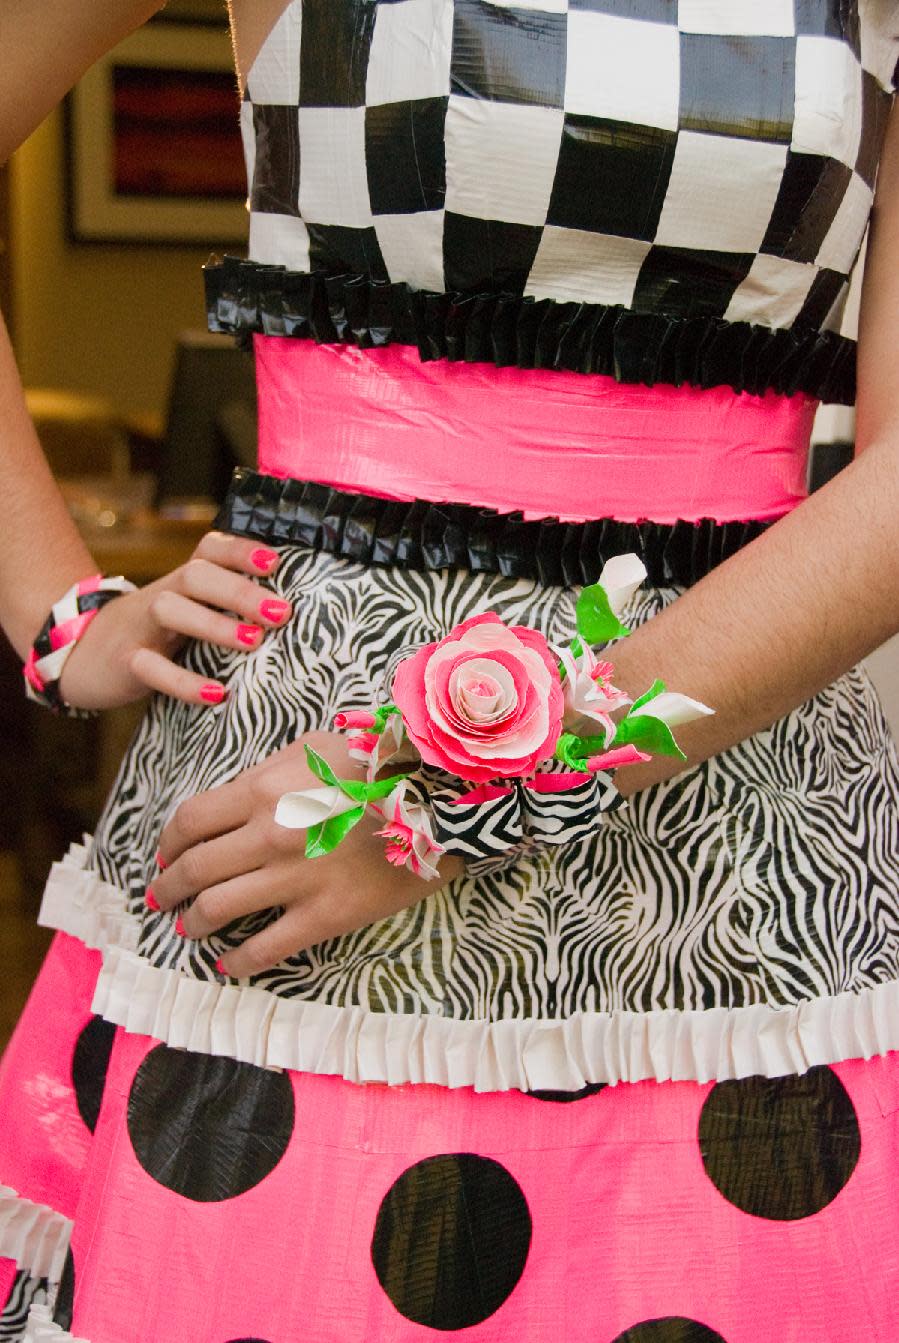 In this 2011 image released by ShurTech Brands, LLC, a duct tape corsage, part of a suit-and-dress ensemble that took a combined 29 rolls of tape and 58 hours to make, is shown. The arrangement won an Honorable Mention prize as Best Corsage in the Duck brand 2011 Stuck at Prom Scholarship Contest. (AP Photo/ShurTech Brands, LLC, Allison Rogers and David Bayless)